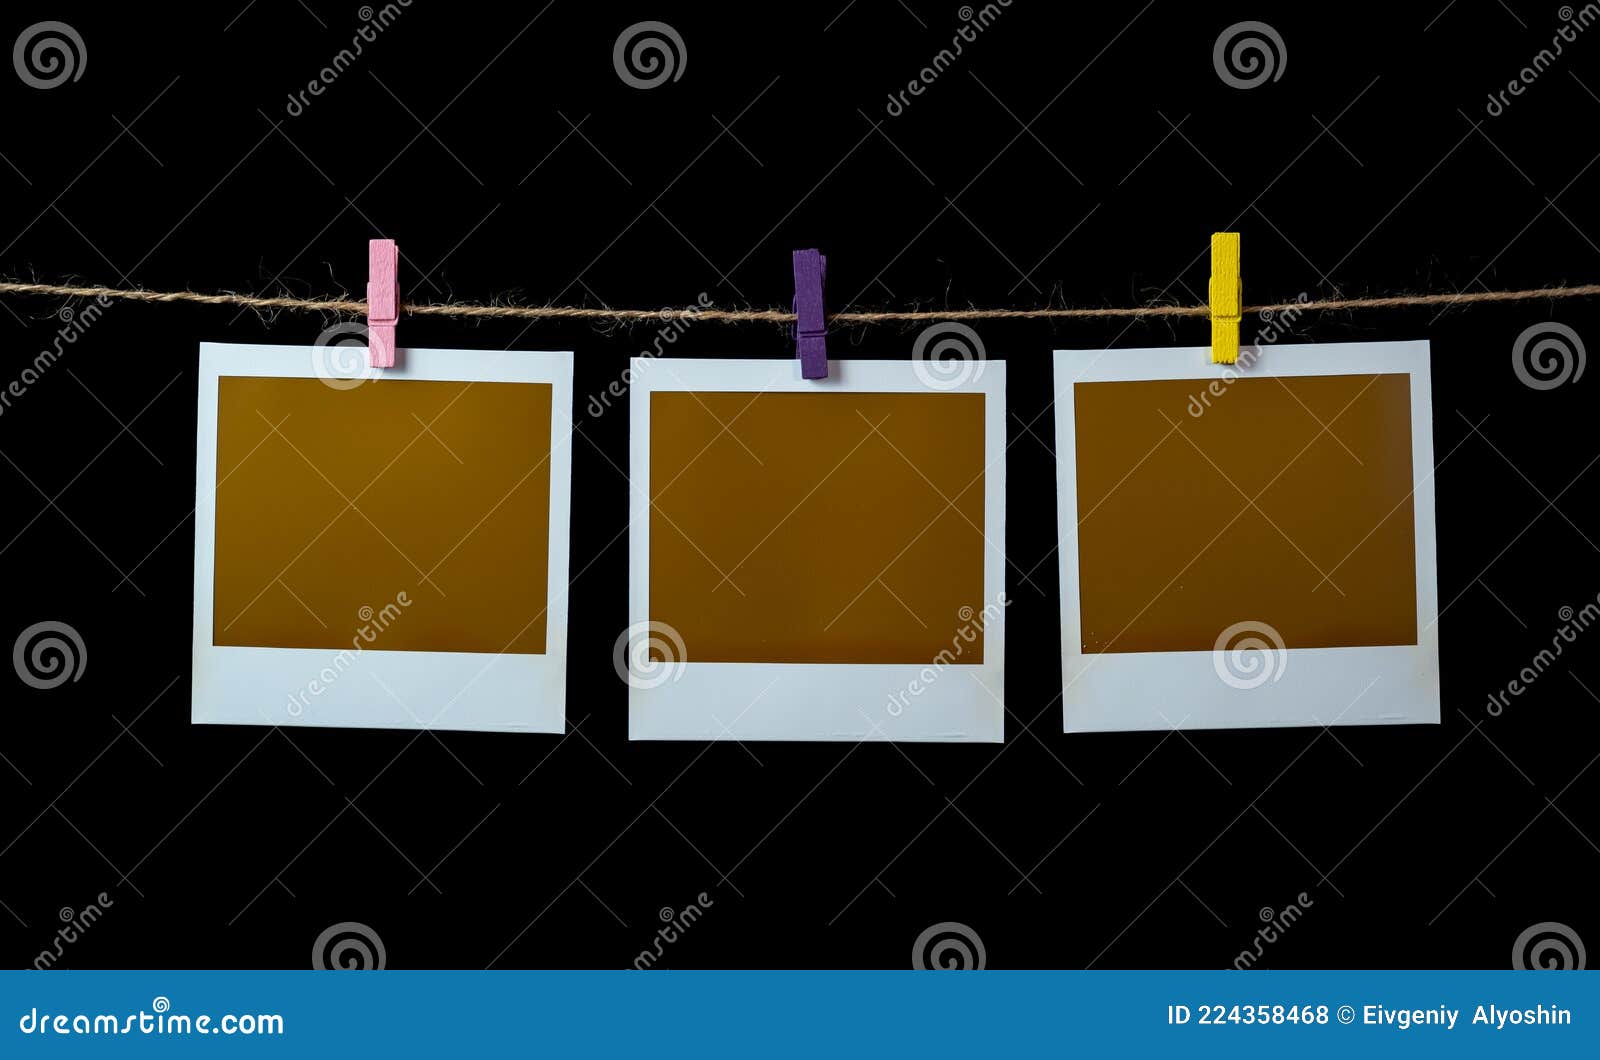 Blank Square Photo Frames Hanging on a Clothesline with Black Background  Stock Photo - Image of blank, background: 224358468